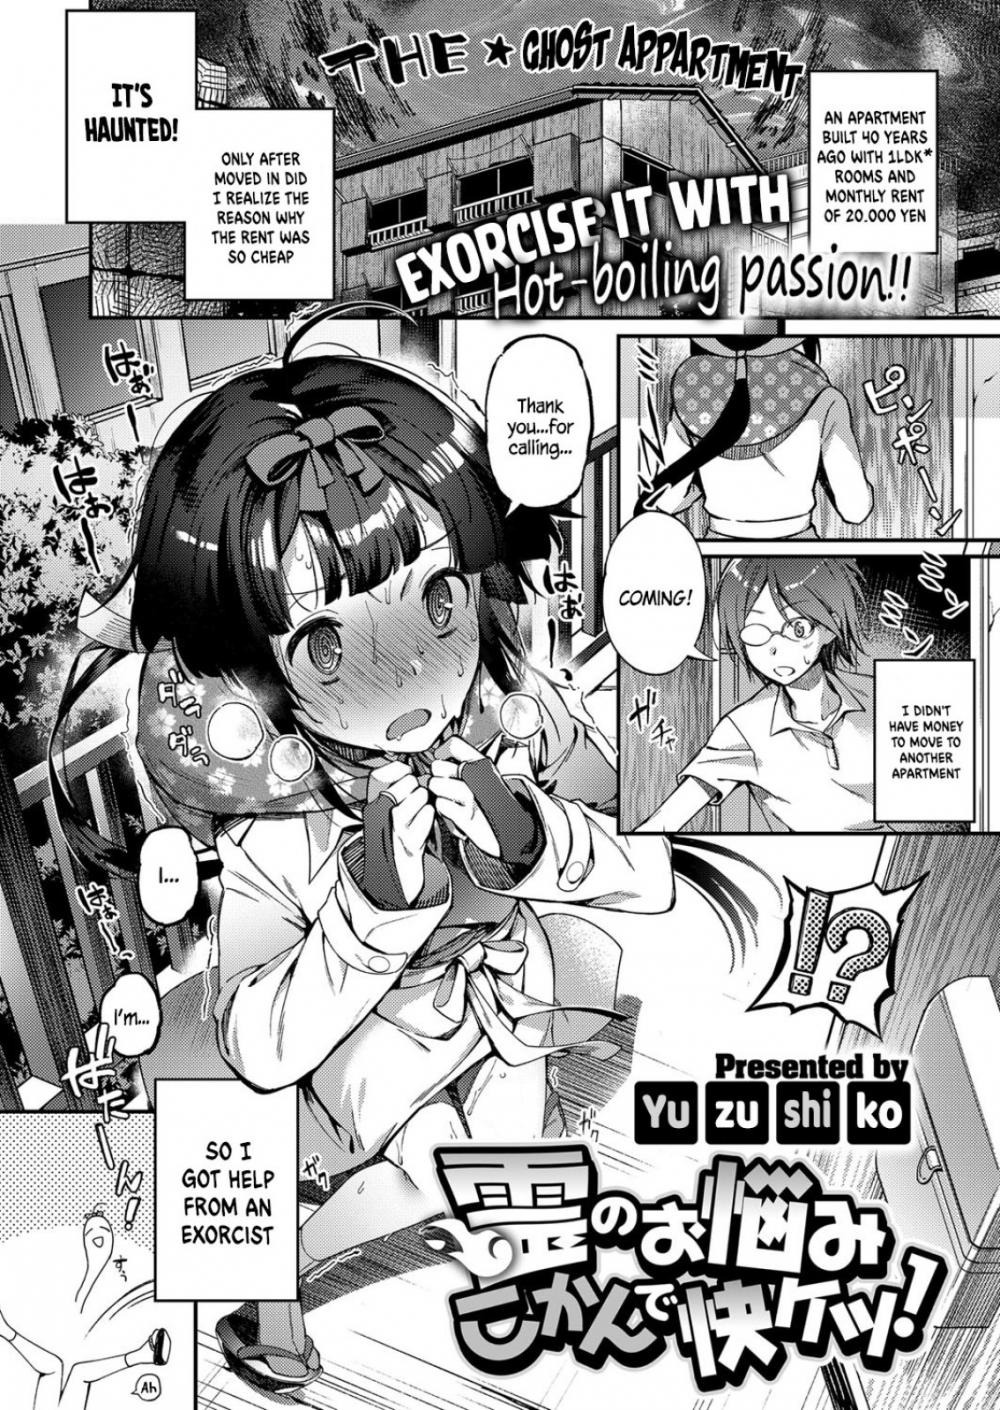 Hentai Manga Comic-The Ghost Apartment - Exorcise It With Hot Boiling Passion!-Read-1